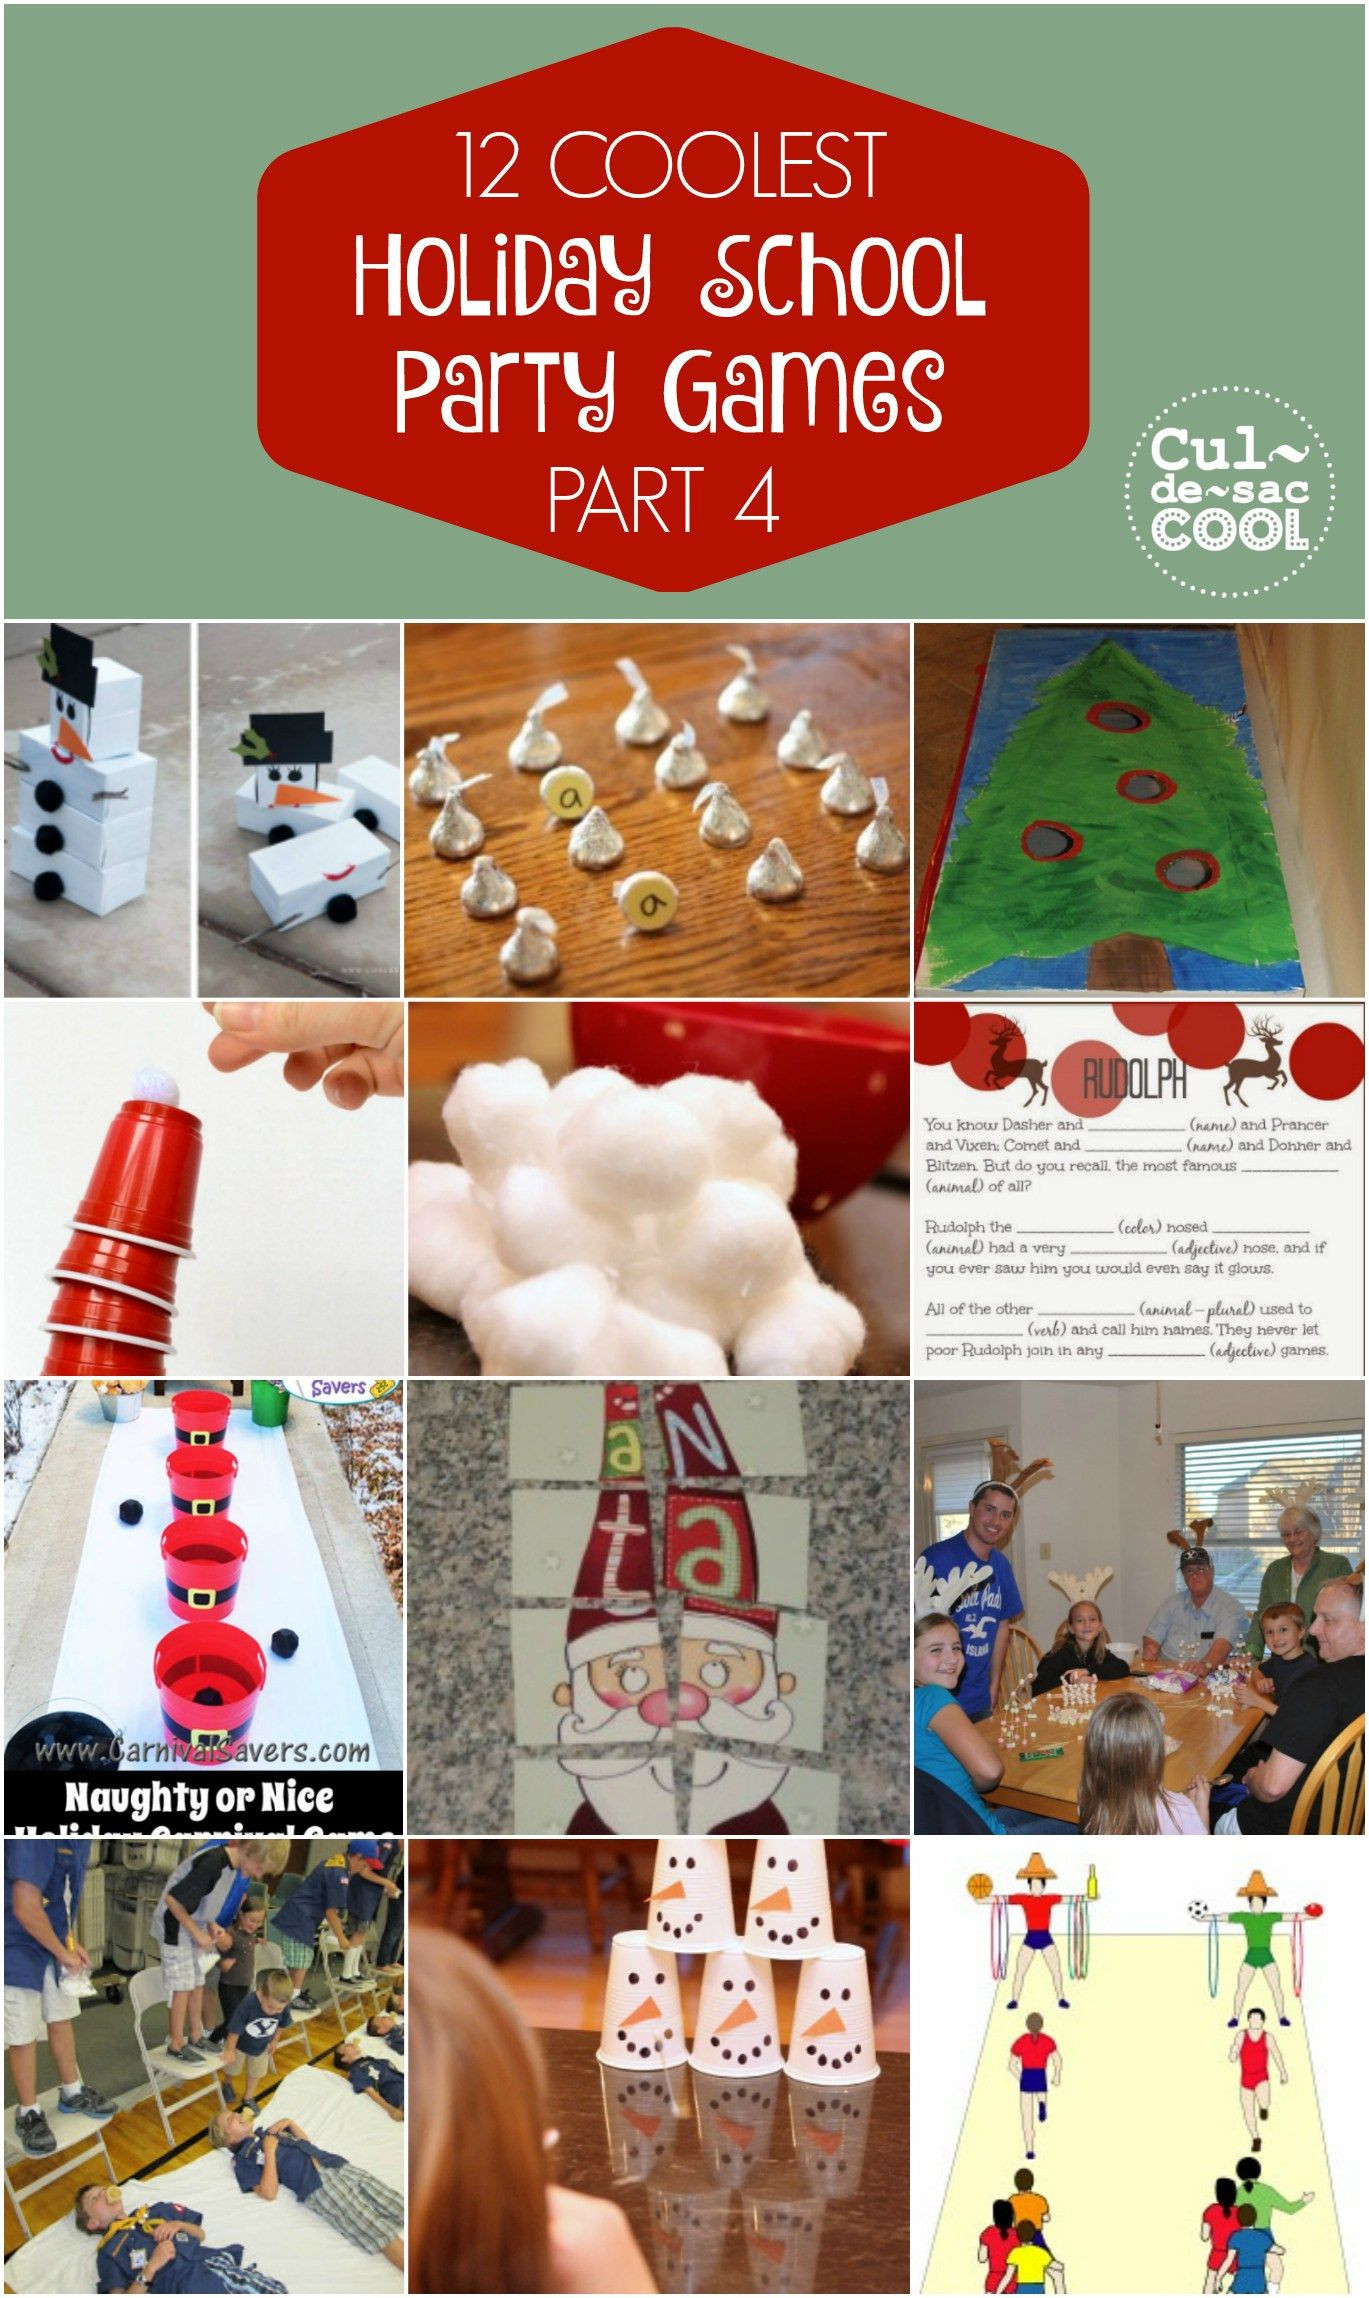 School Holiday Party Ideas
 12 Coolest Holiday School Party Games Part 4Collage